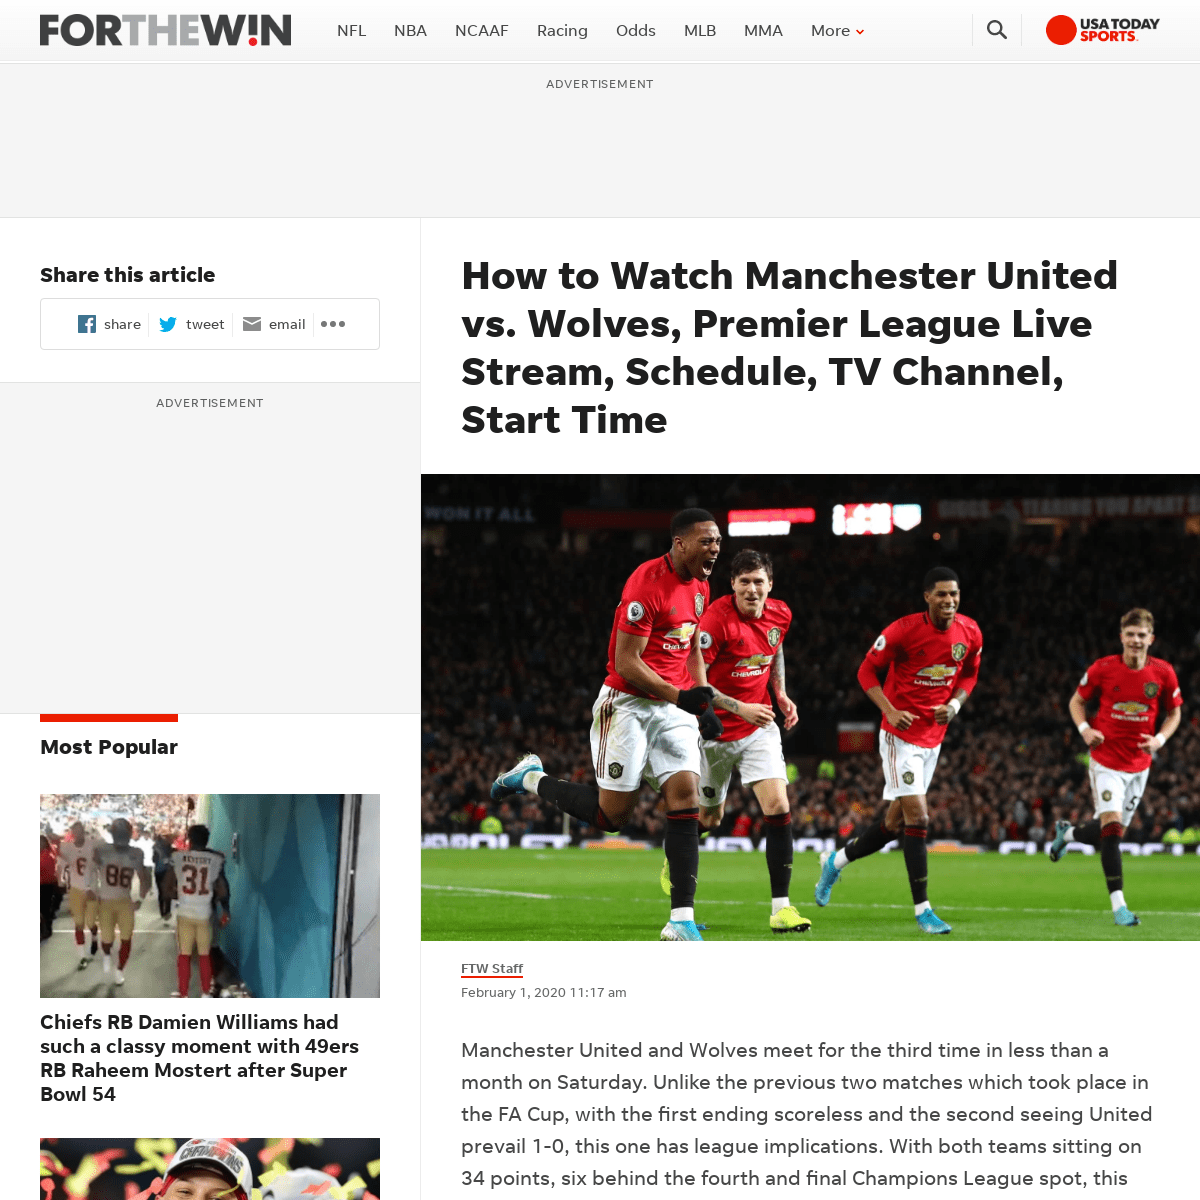 A complete backup of ftw.usatoday.com/2020/02/how-to-watch-manchester-united-vs-wolves-premier-league-live-stream-schedule-tv-ch